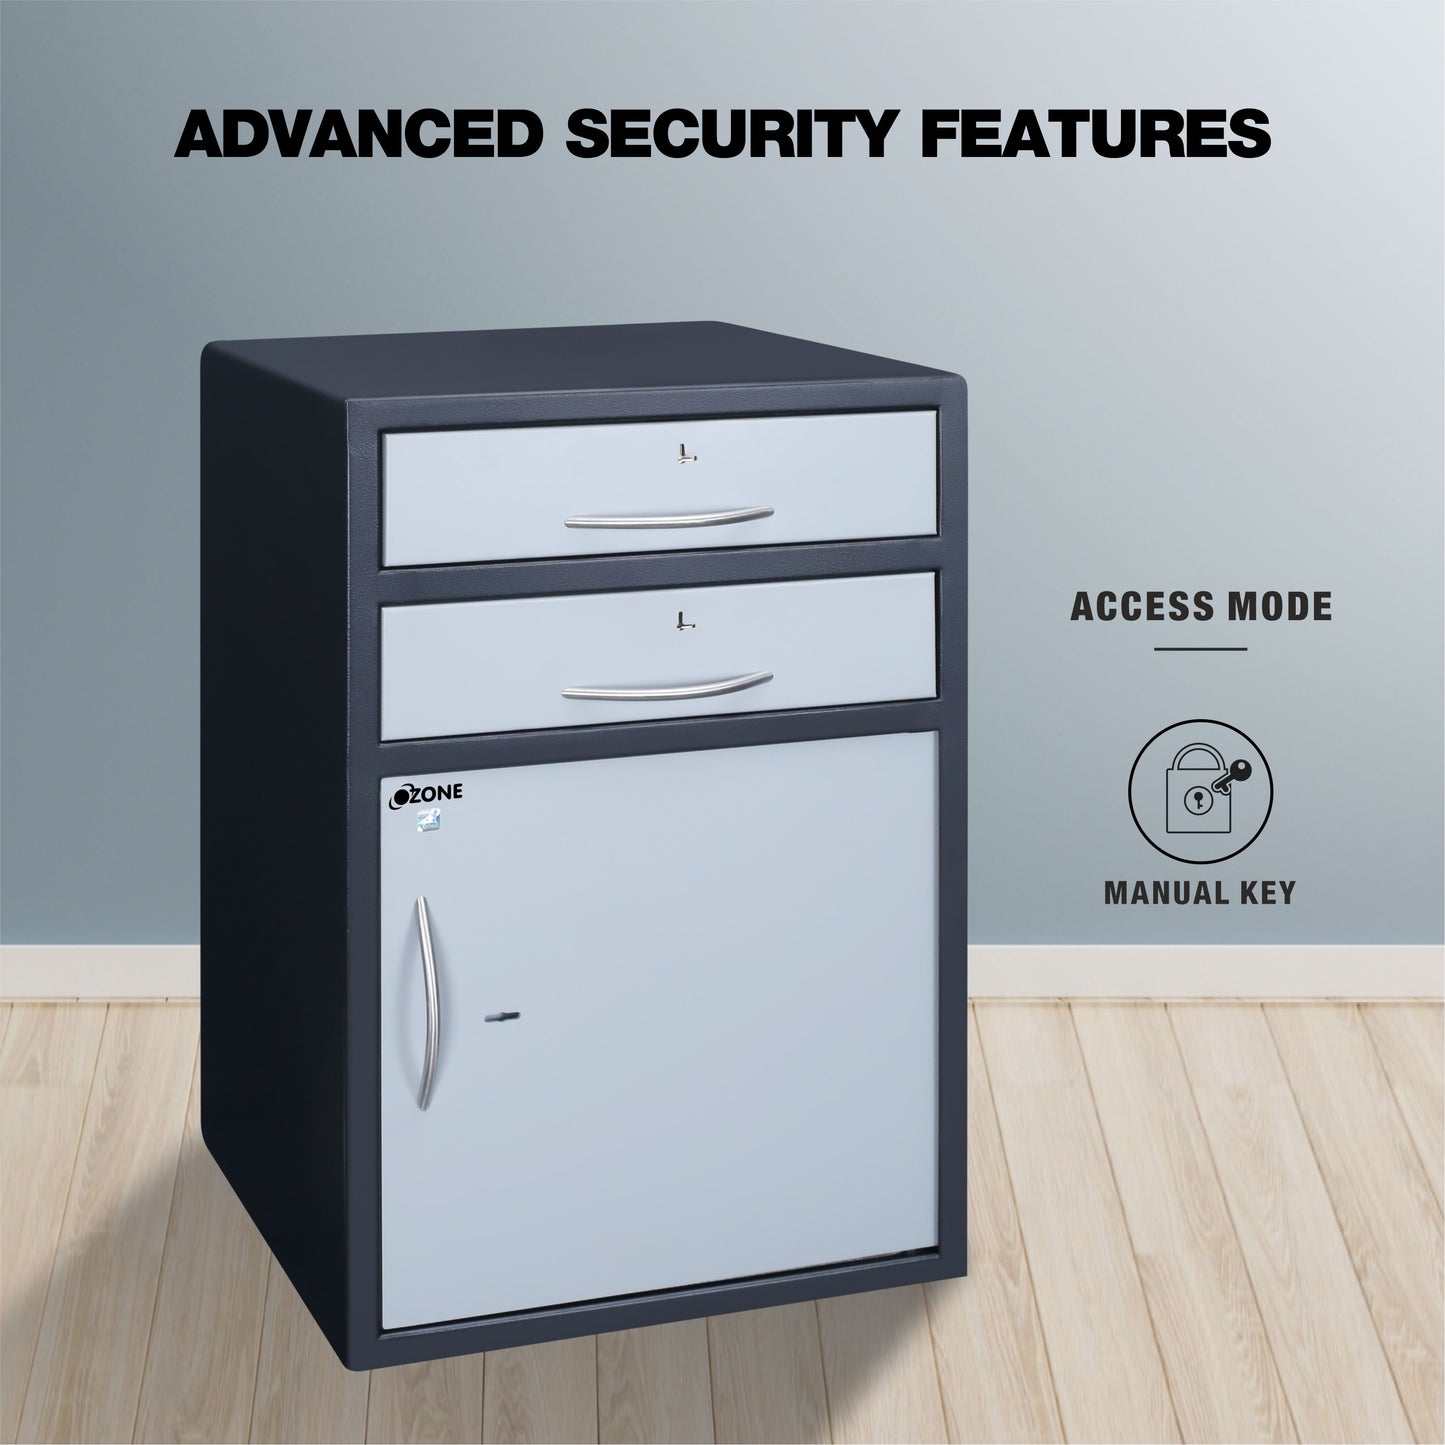 Ozone Multi-purpose Safe for Retail Spaces | High-security Mechanical Key (92 Ltrs.)